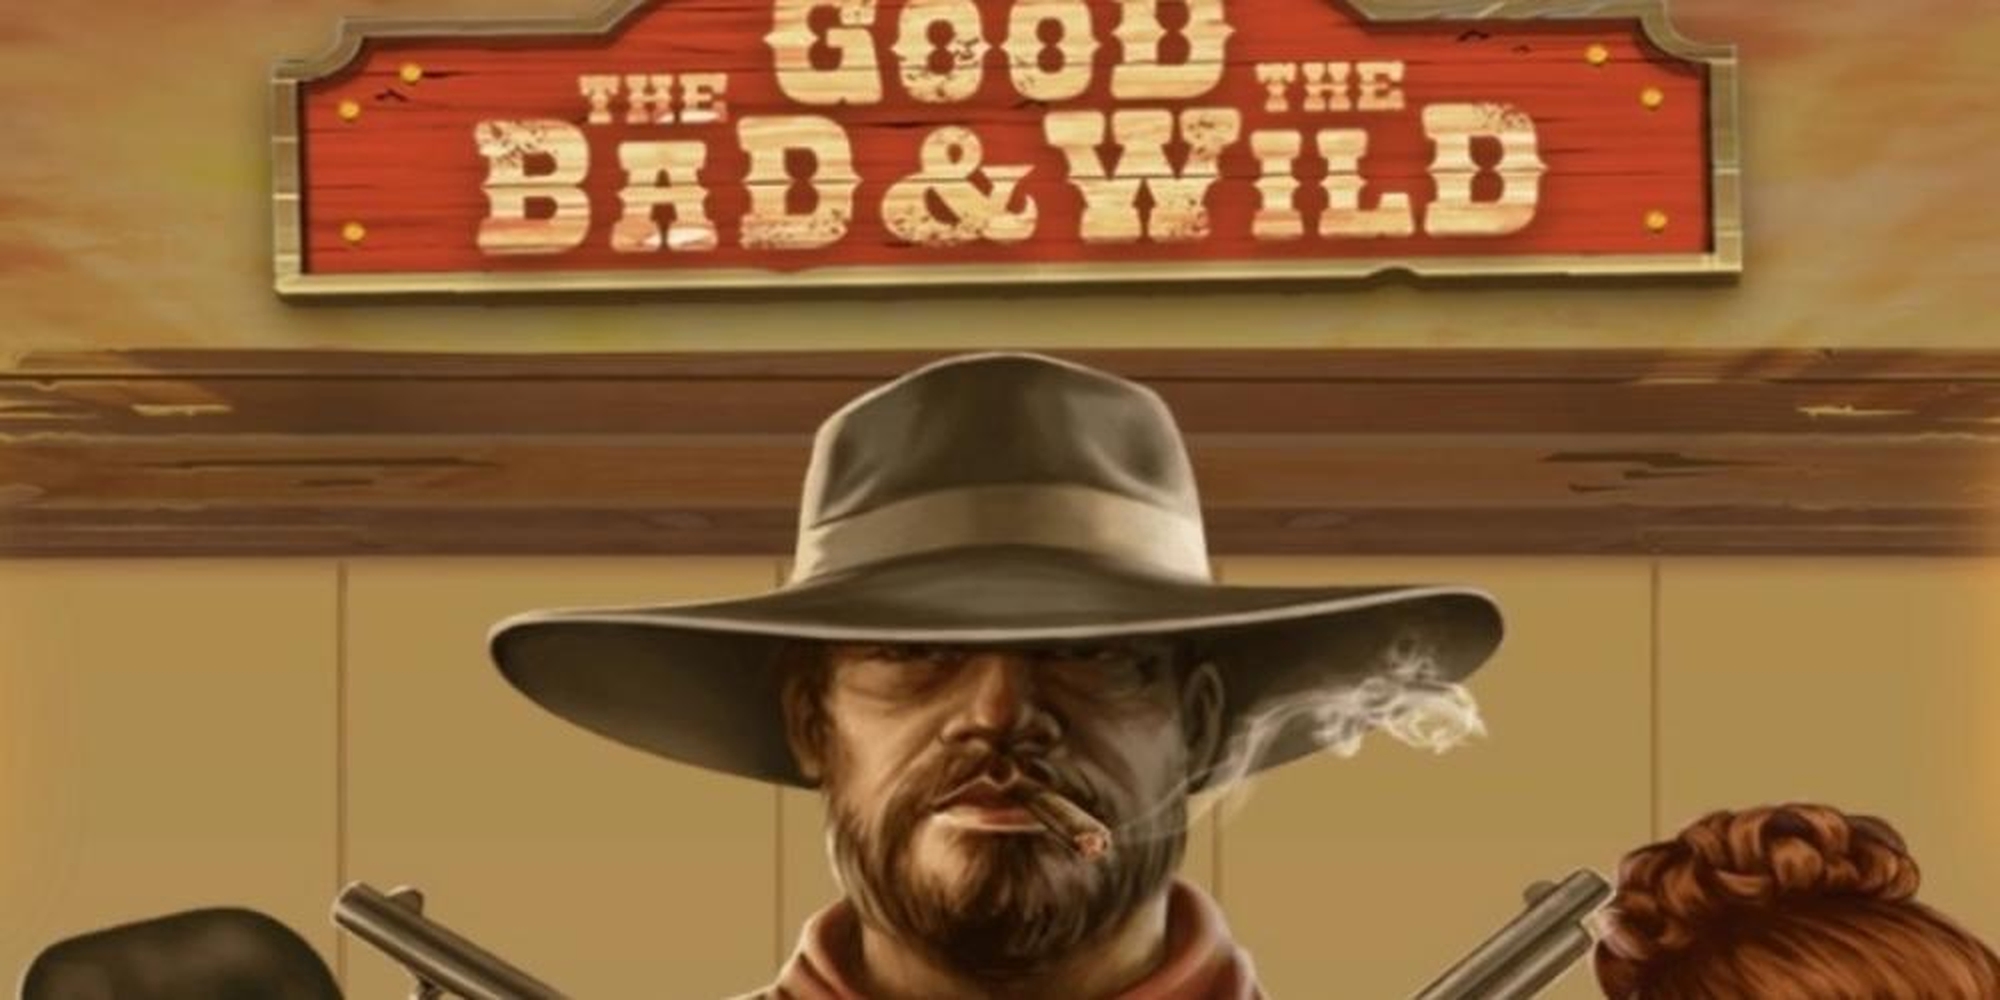 The Good The Bad And The Wild demo